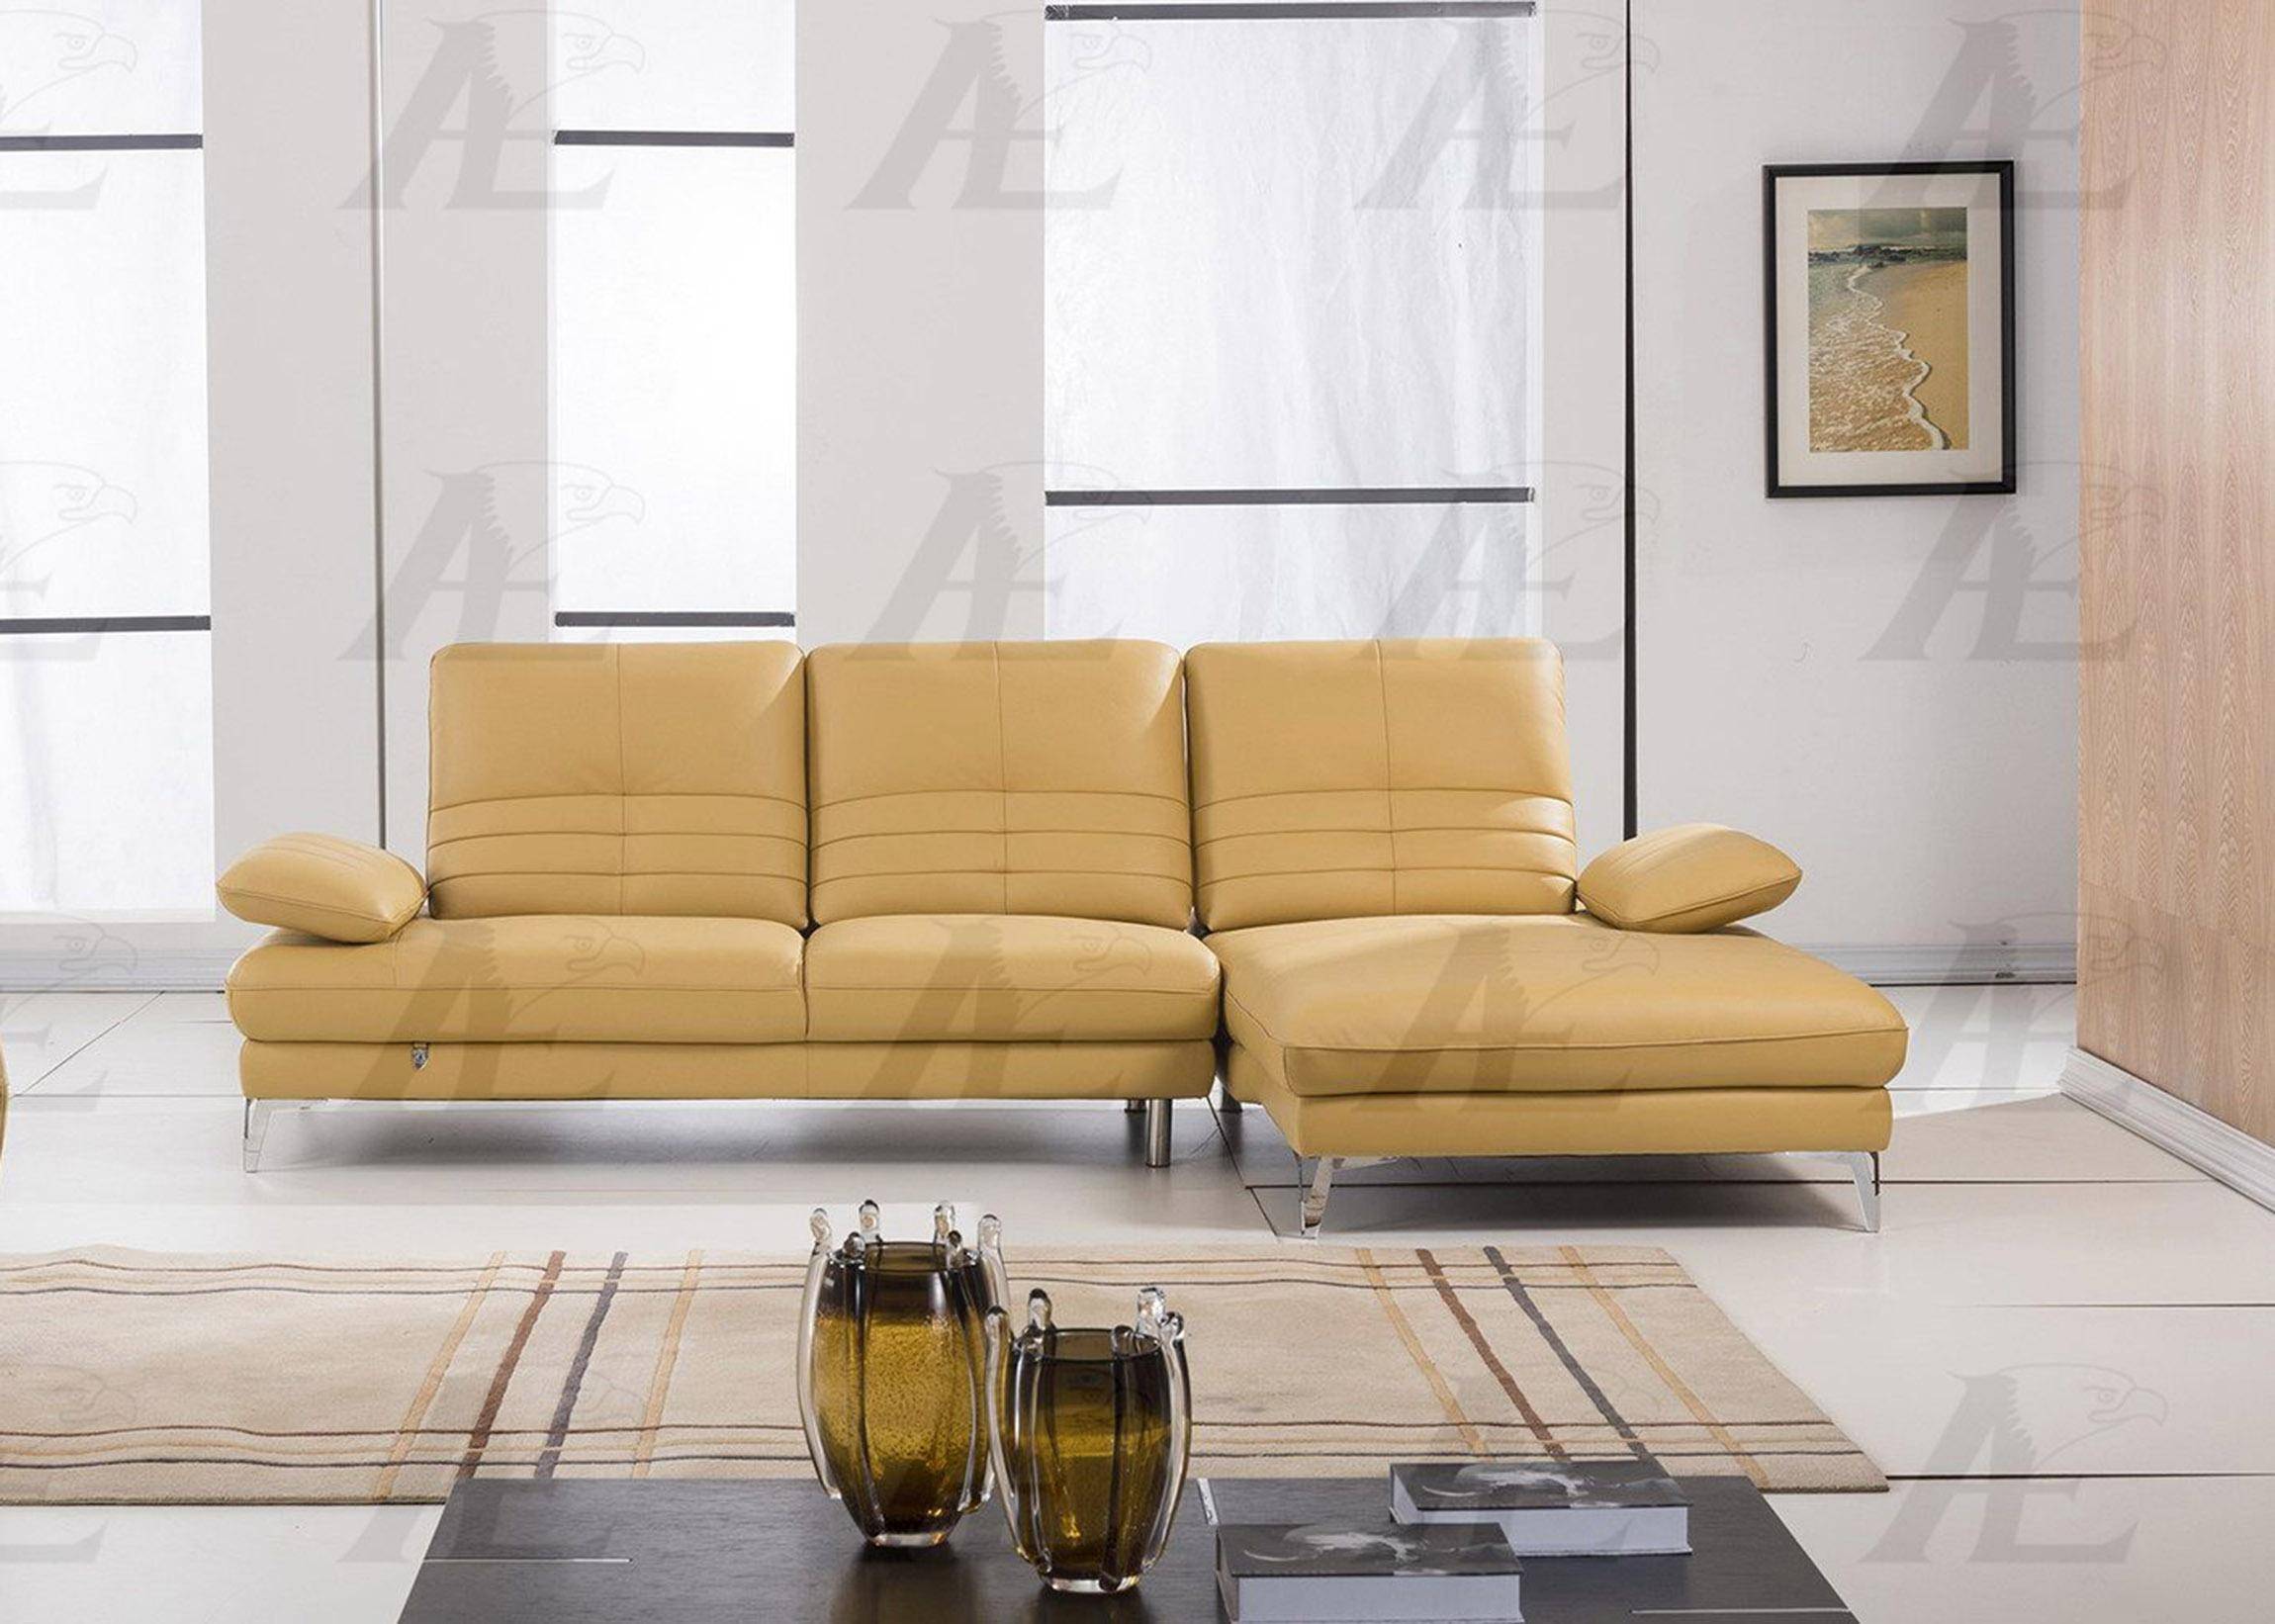 Ek L070 Yo Sectional Sofa, Yellow Leather Sectional Couch